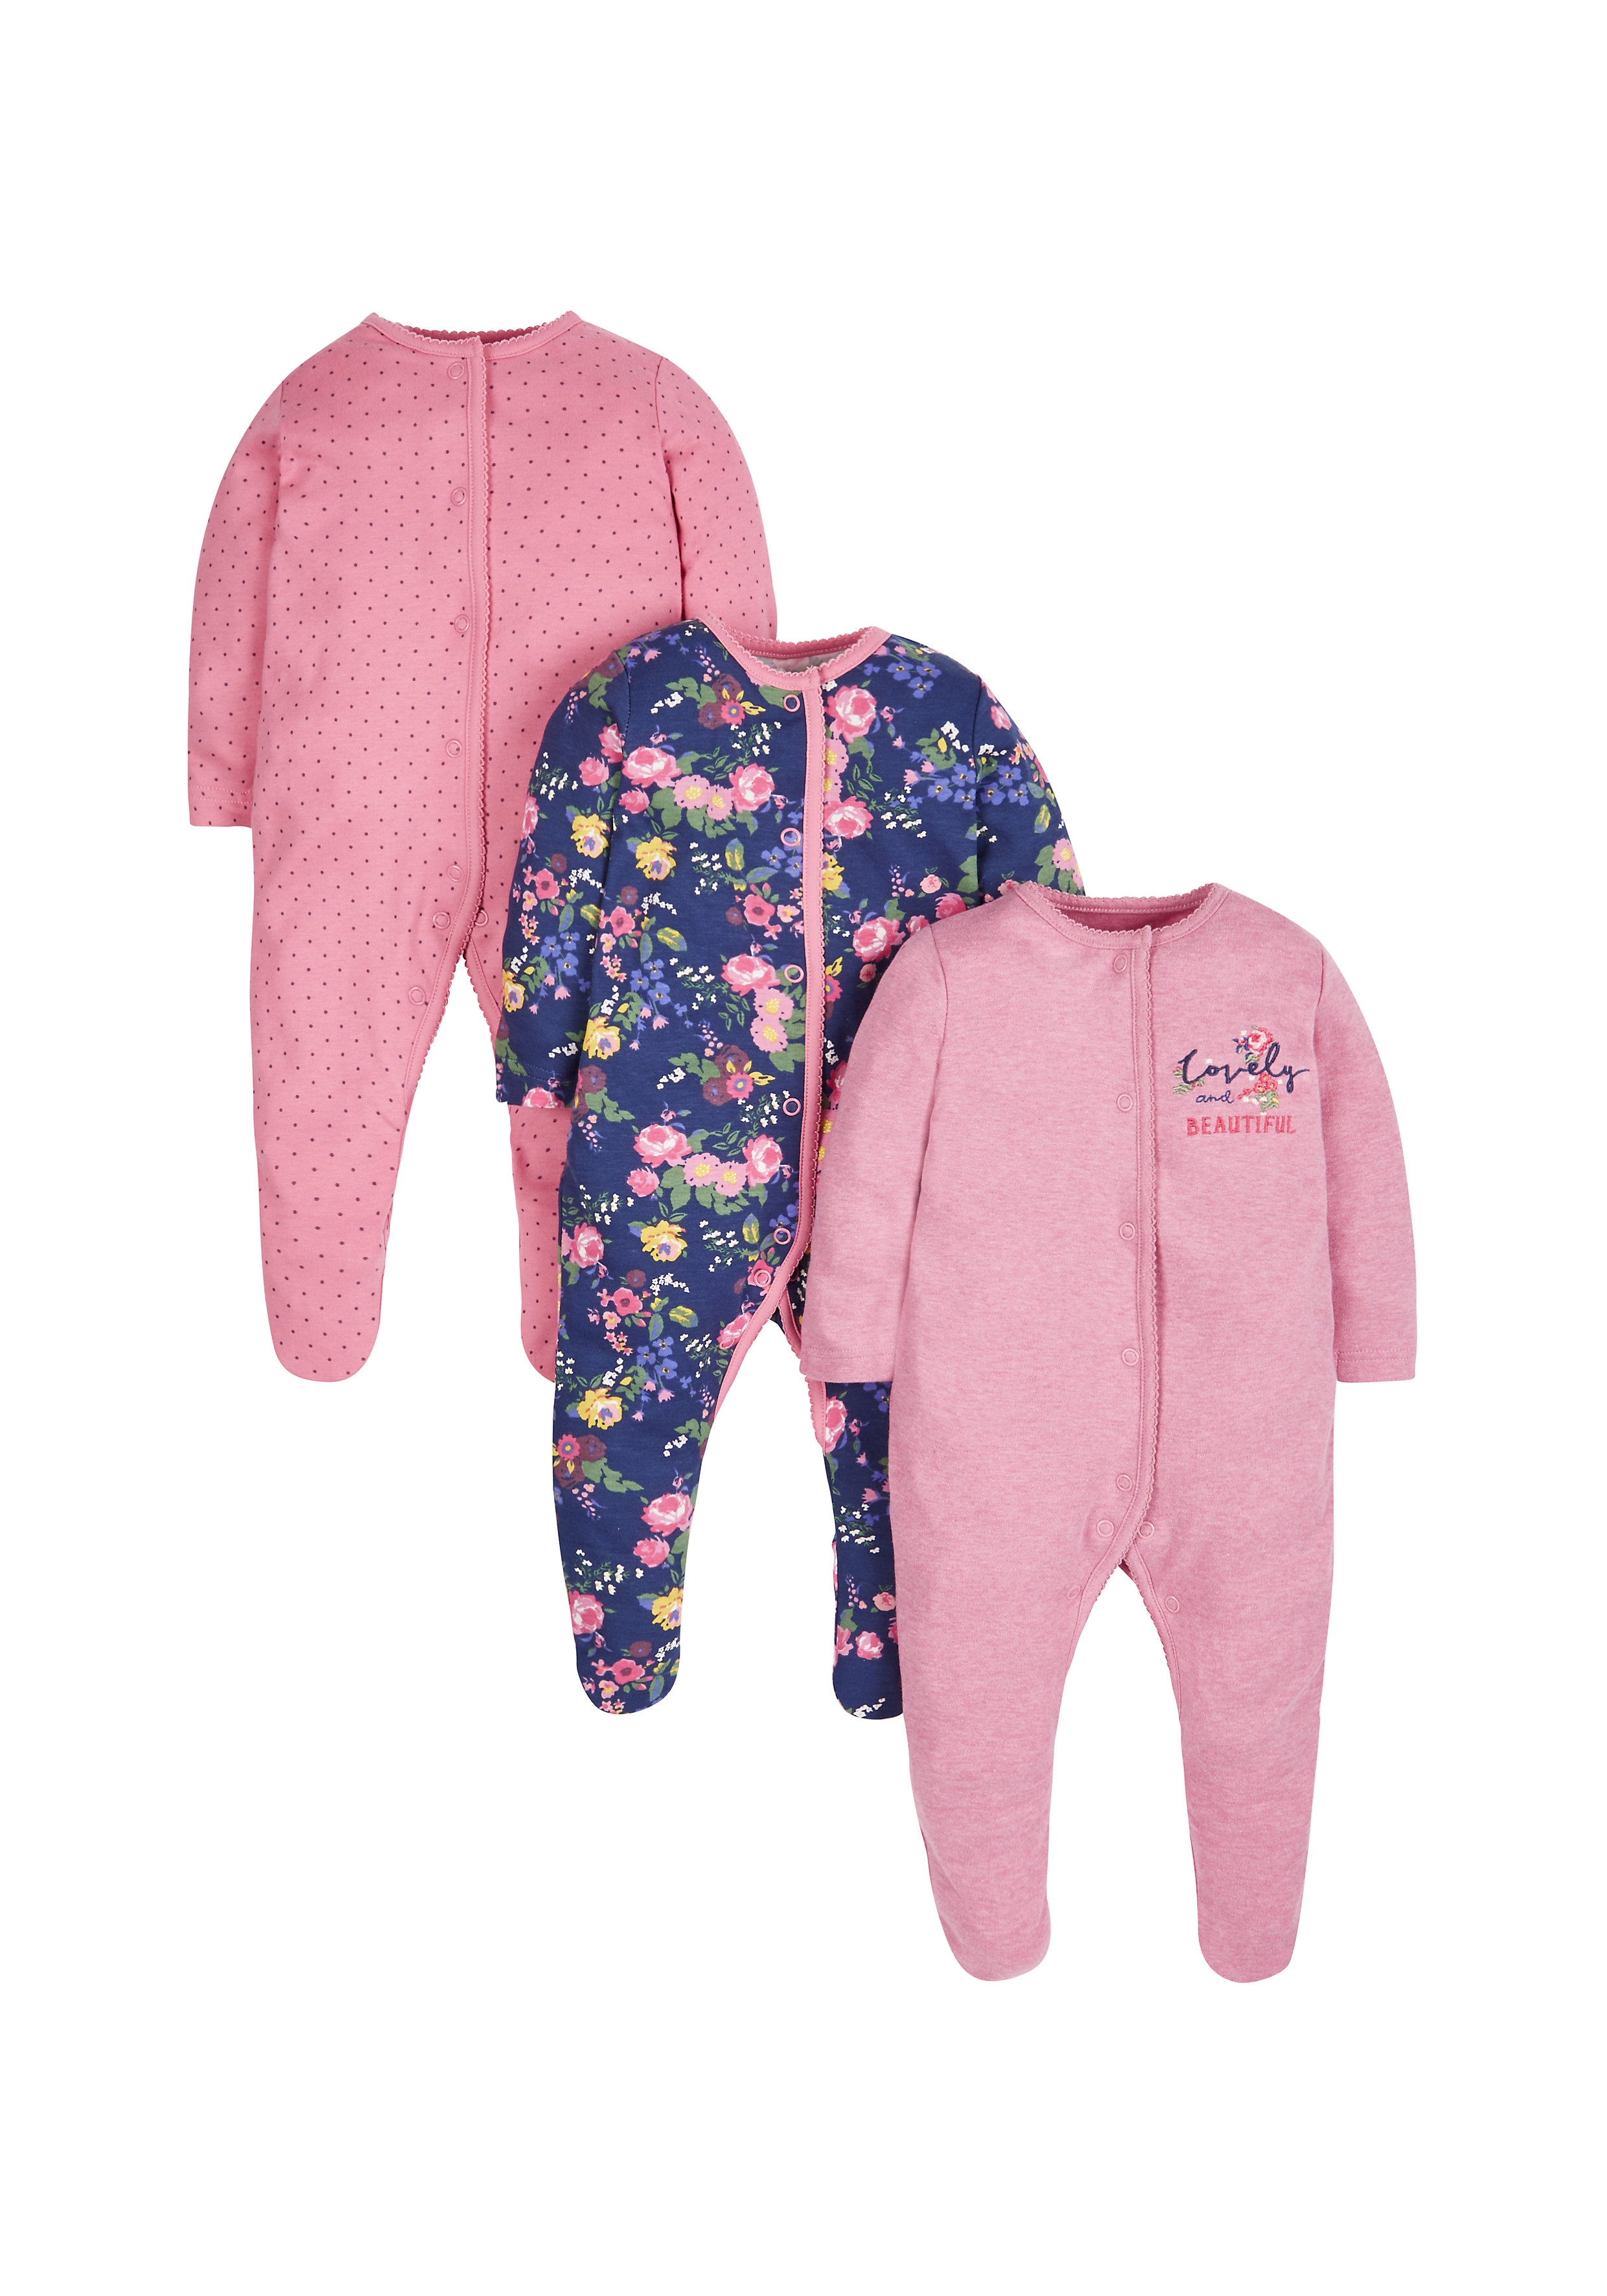 Mothercare | Girls Autumn Floral Sleepsuits - Pack Of 3 - Multicolor